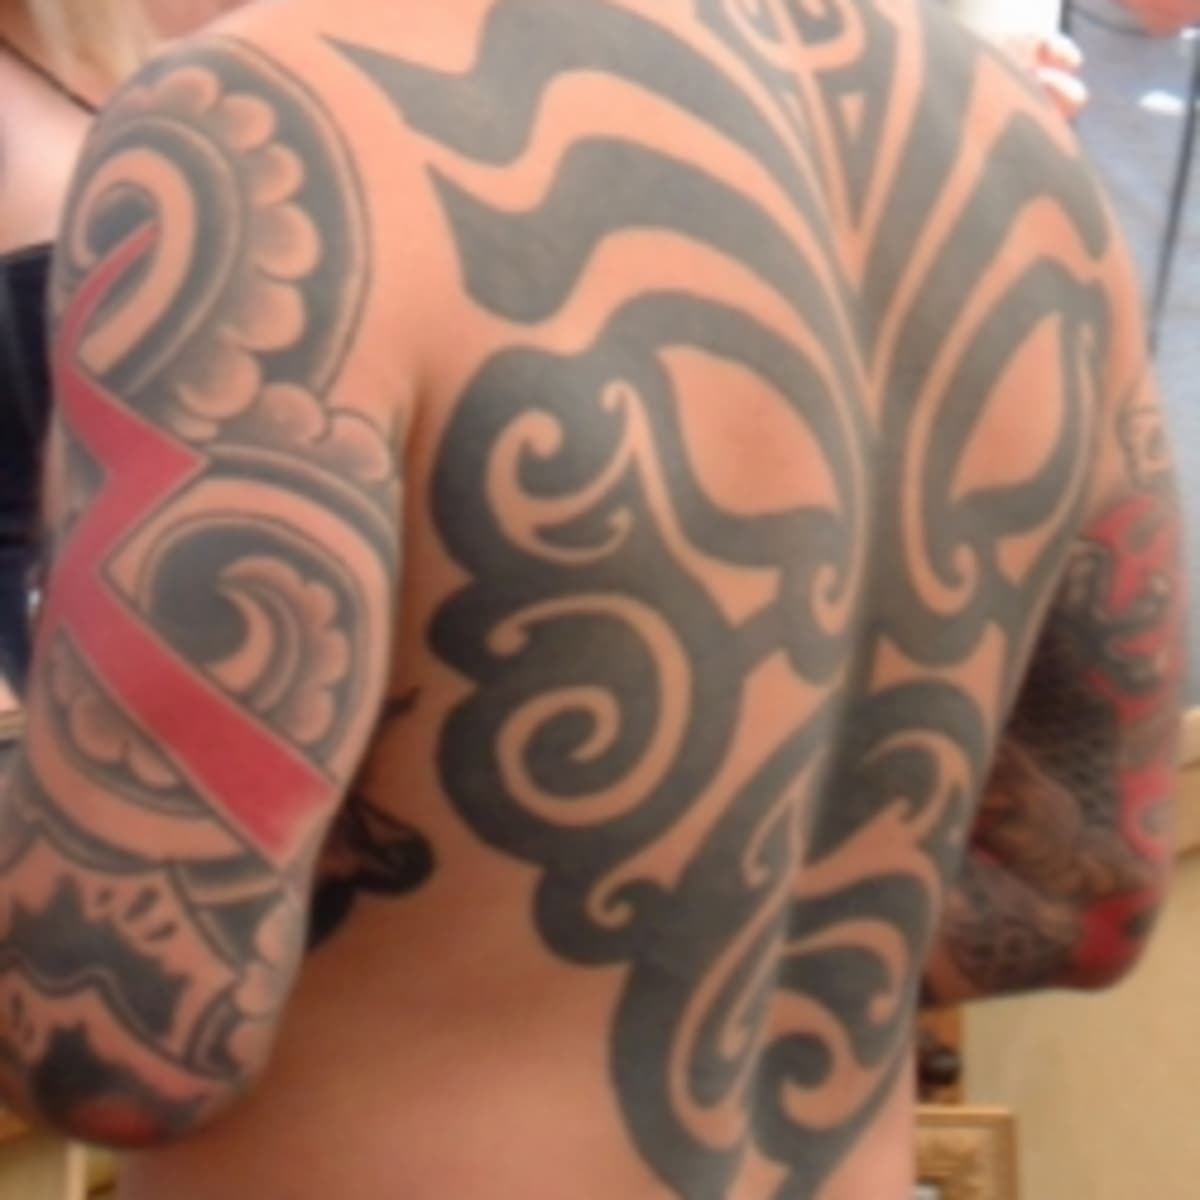 Tribal Tattoos - HubPages